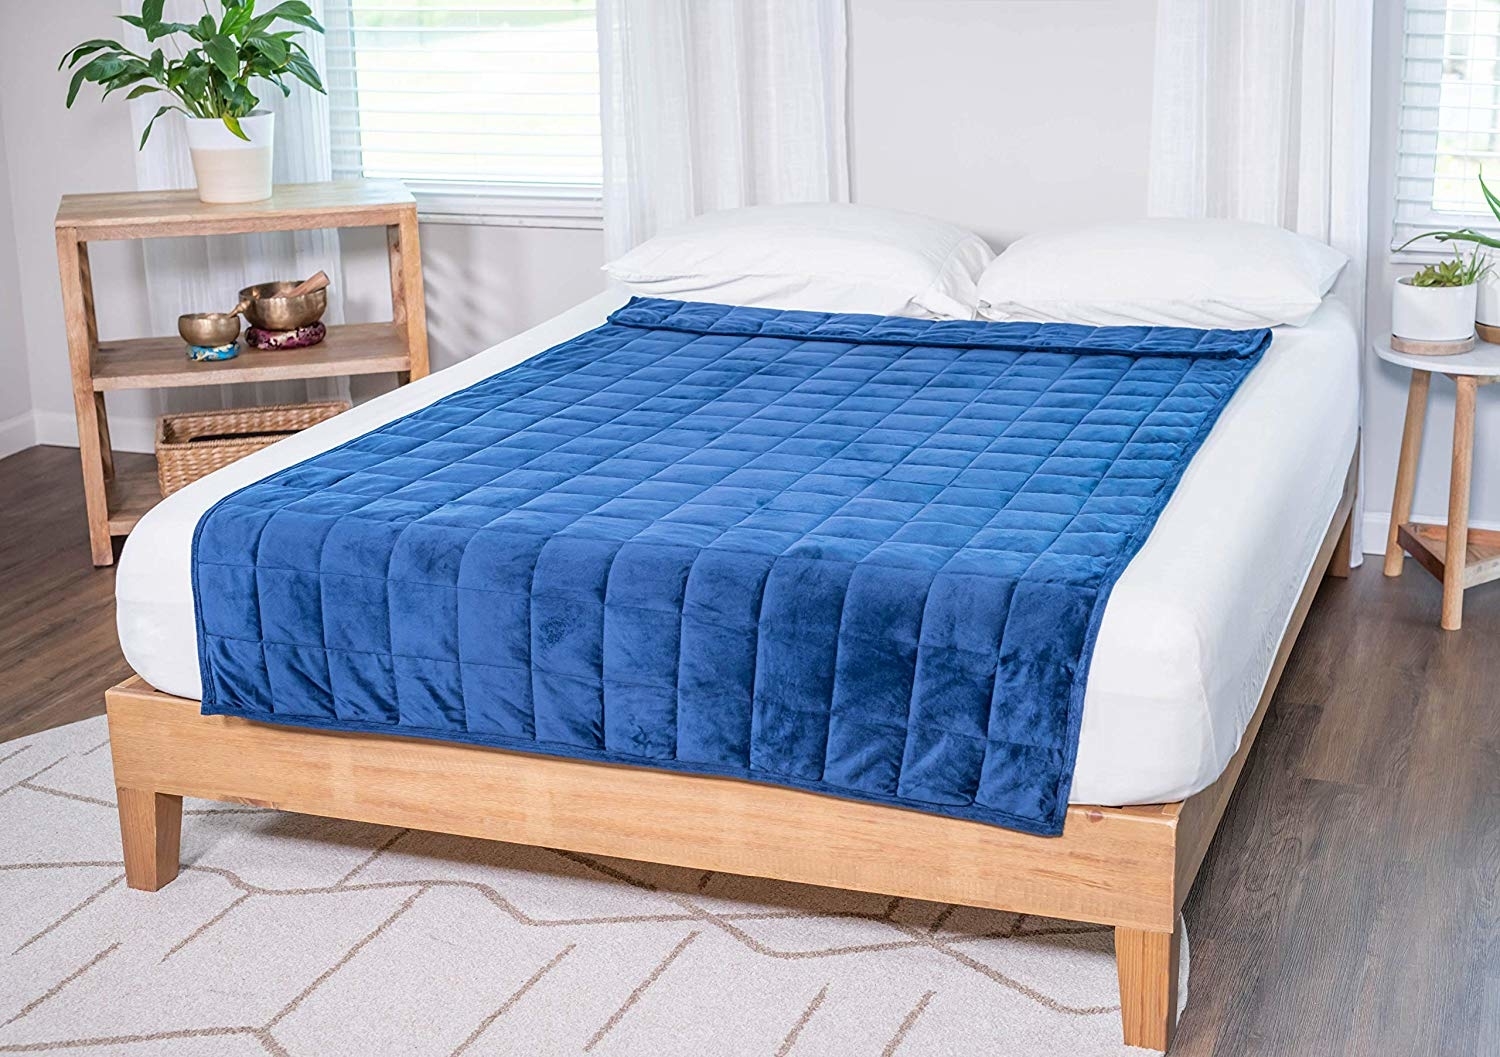 A blue weighted blanket on the bed